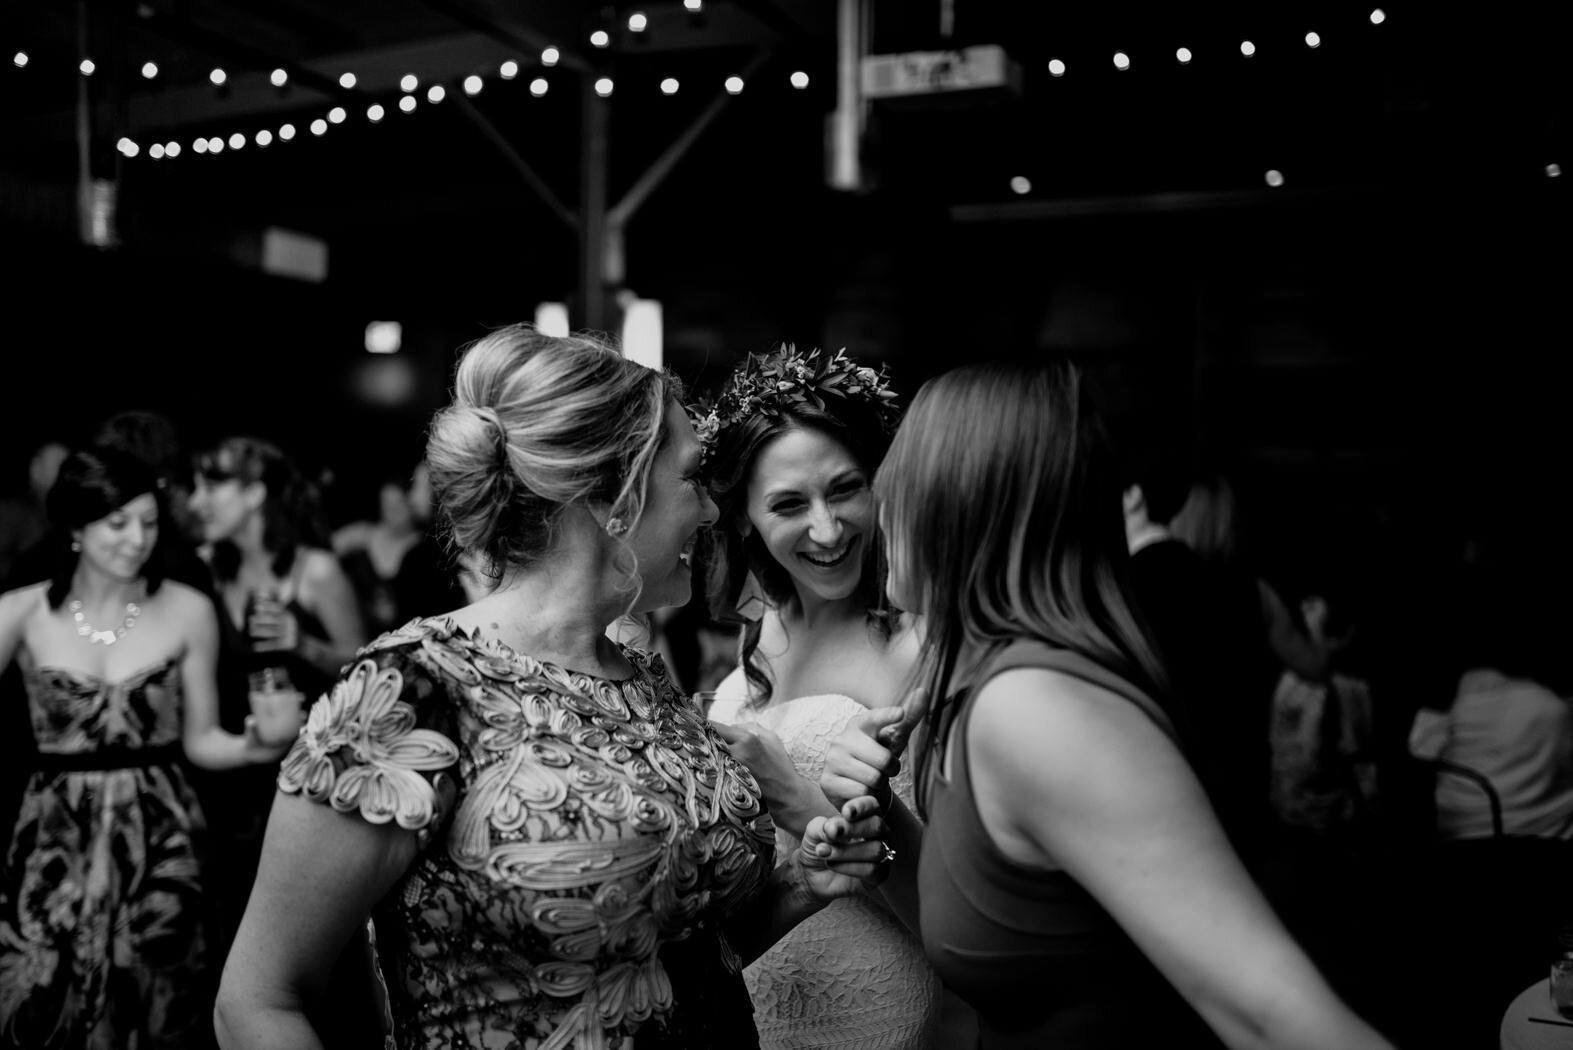 the bride, her mother and her sister dancing during the reception